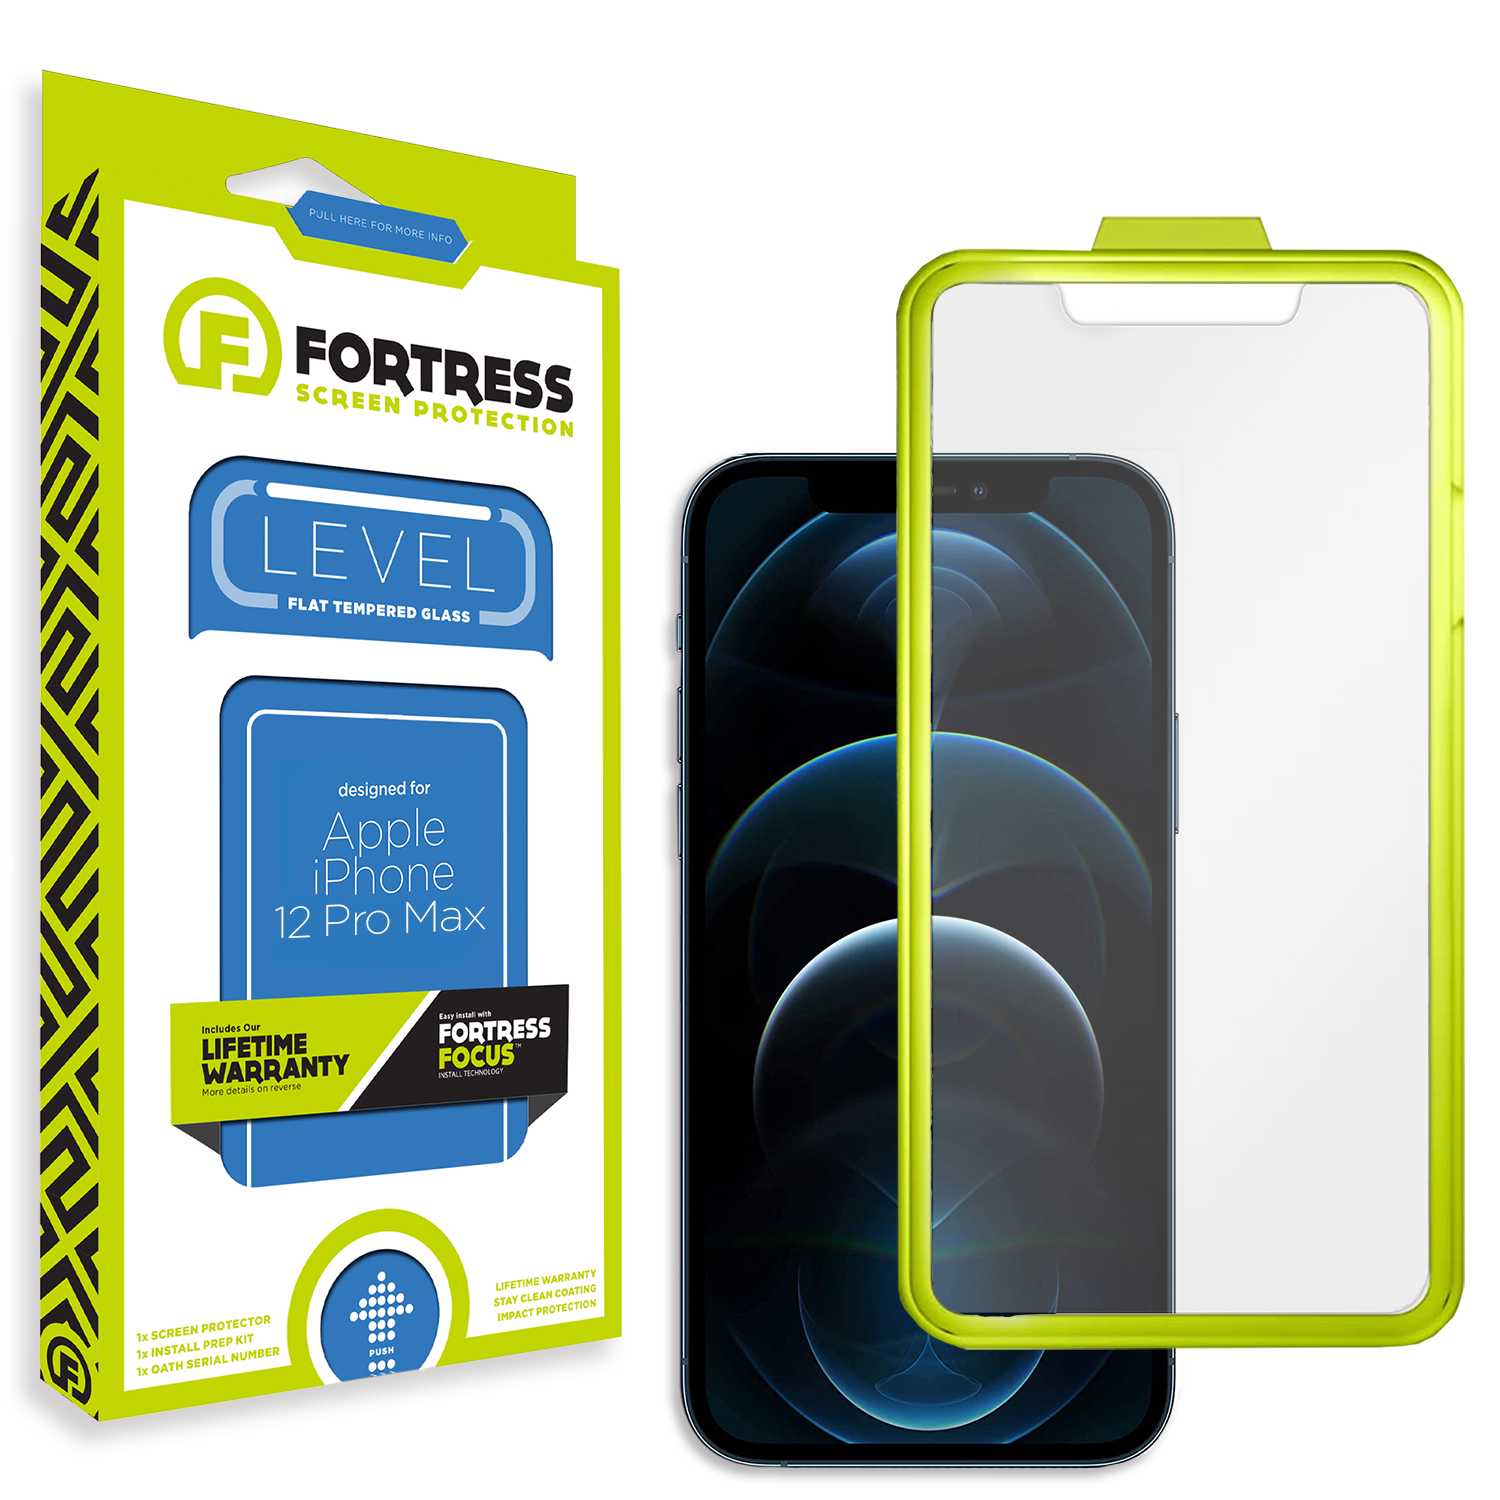 Fortress iPhone 12 Pro Max Screen Protector $0CoverageInstallTool Scooch Screen Protector